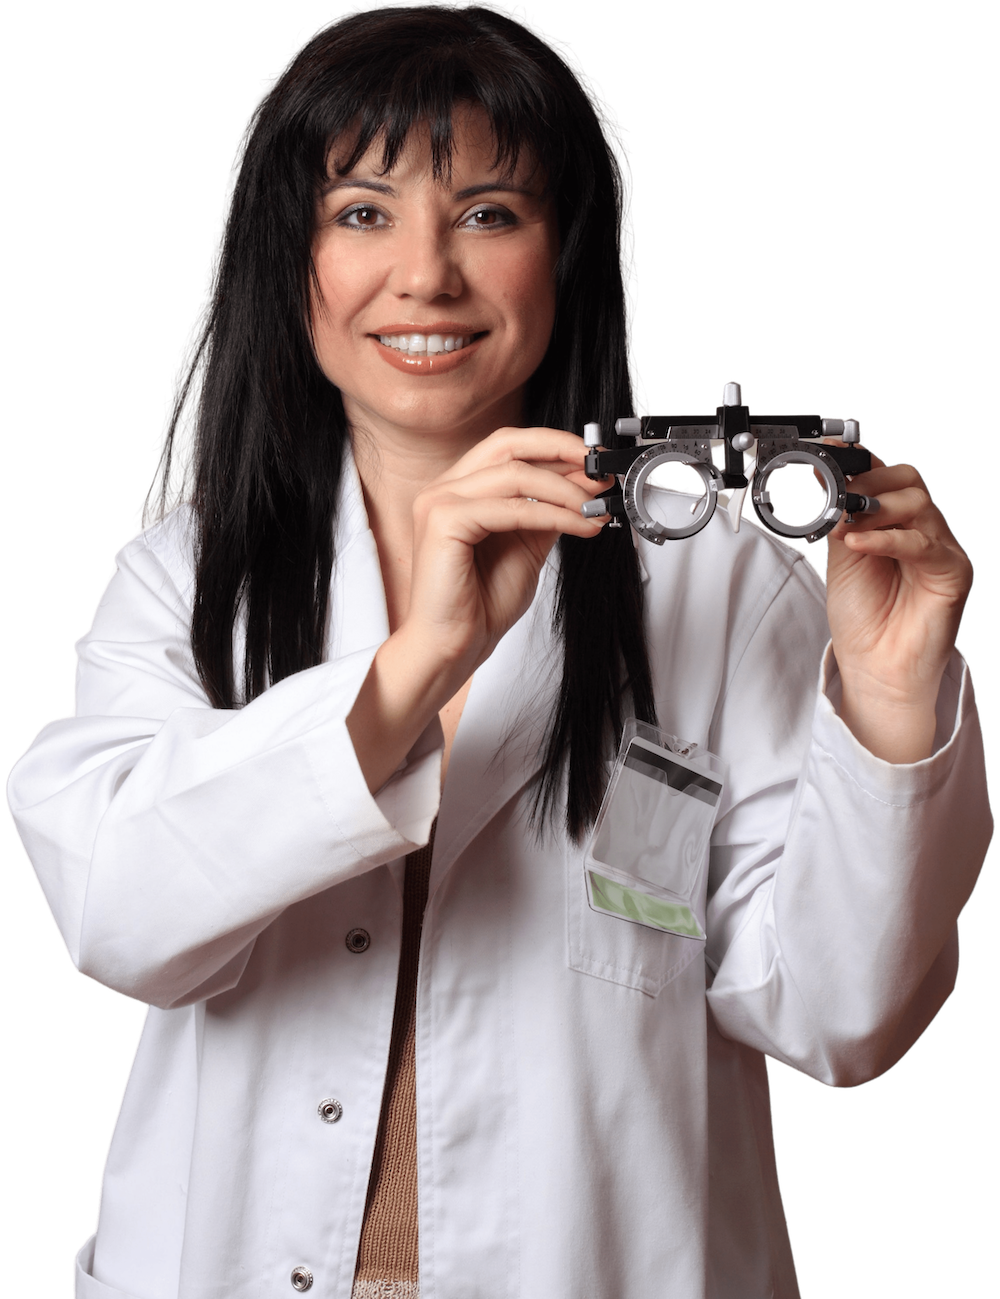 women smiling with orthopaedic glasses in her hands